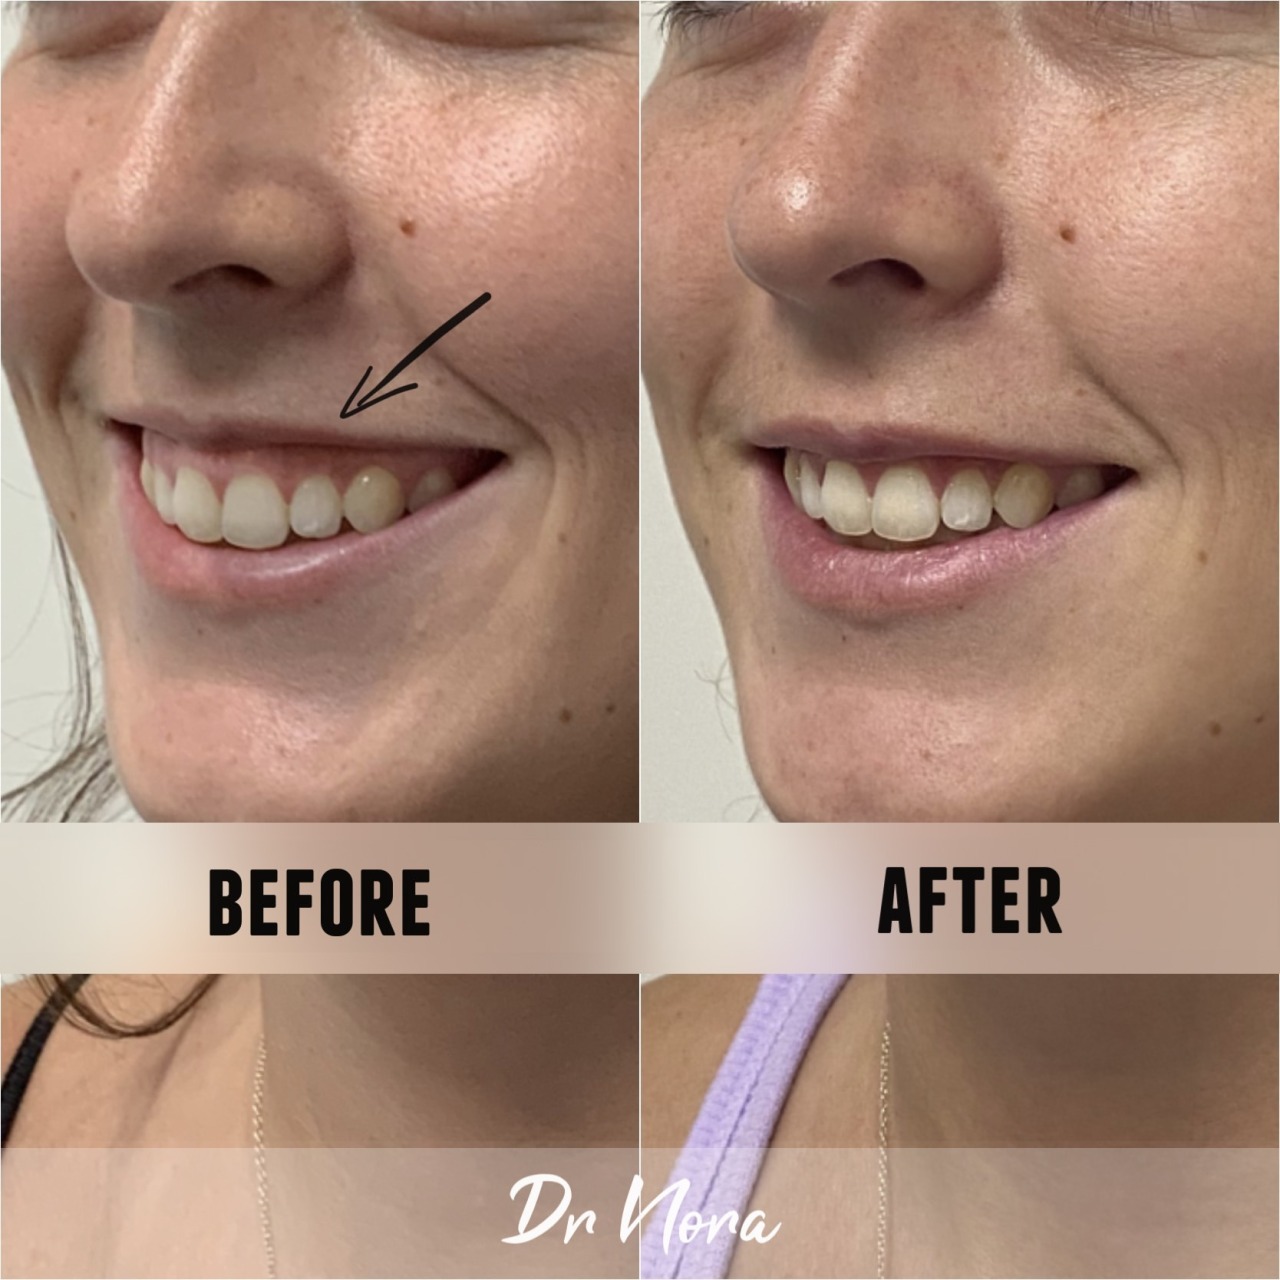 Anti-wrinkle treatment of a gummy smile 😃Anti-wrinkle therapy can be used to reduce the appearance of a gummy smile. Treatment time is 15 minutes, optimal results are seen at 2 weeks and lasts up to 3-5 months.
If you have any questions or would like...